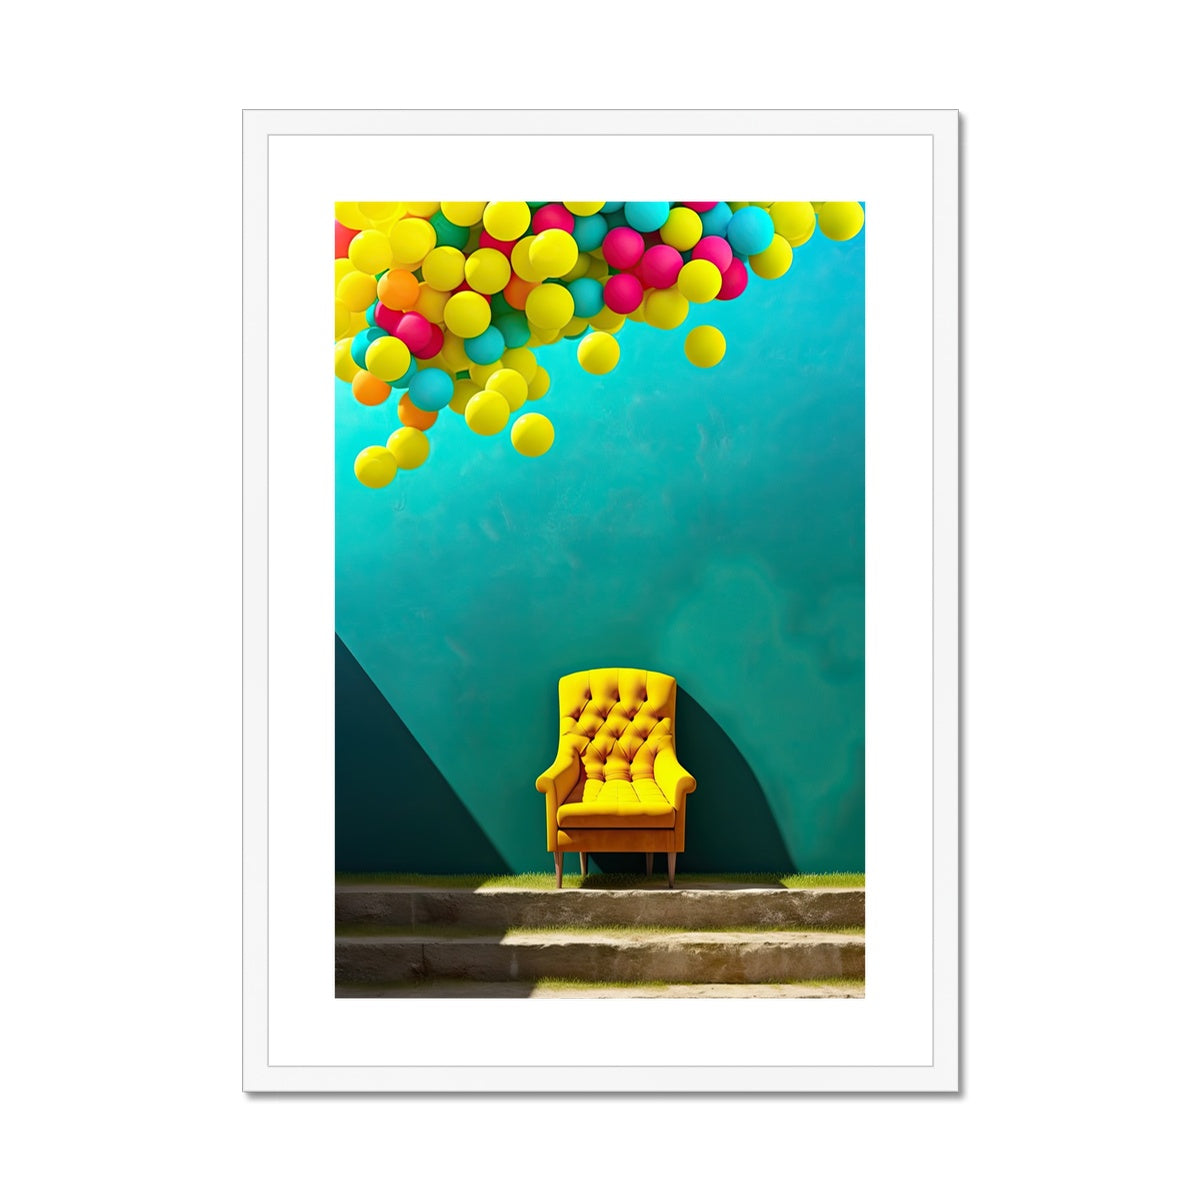 Framed & Mounted Print - Pixel Gallery